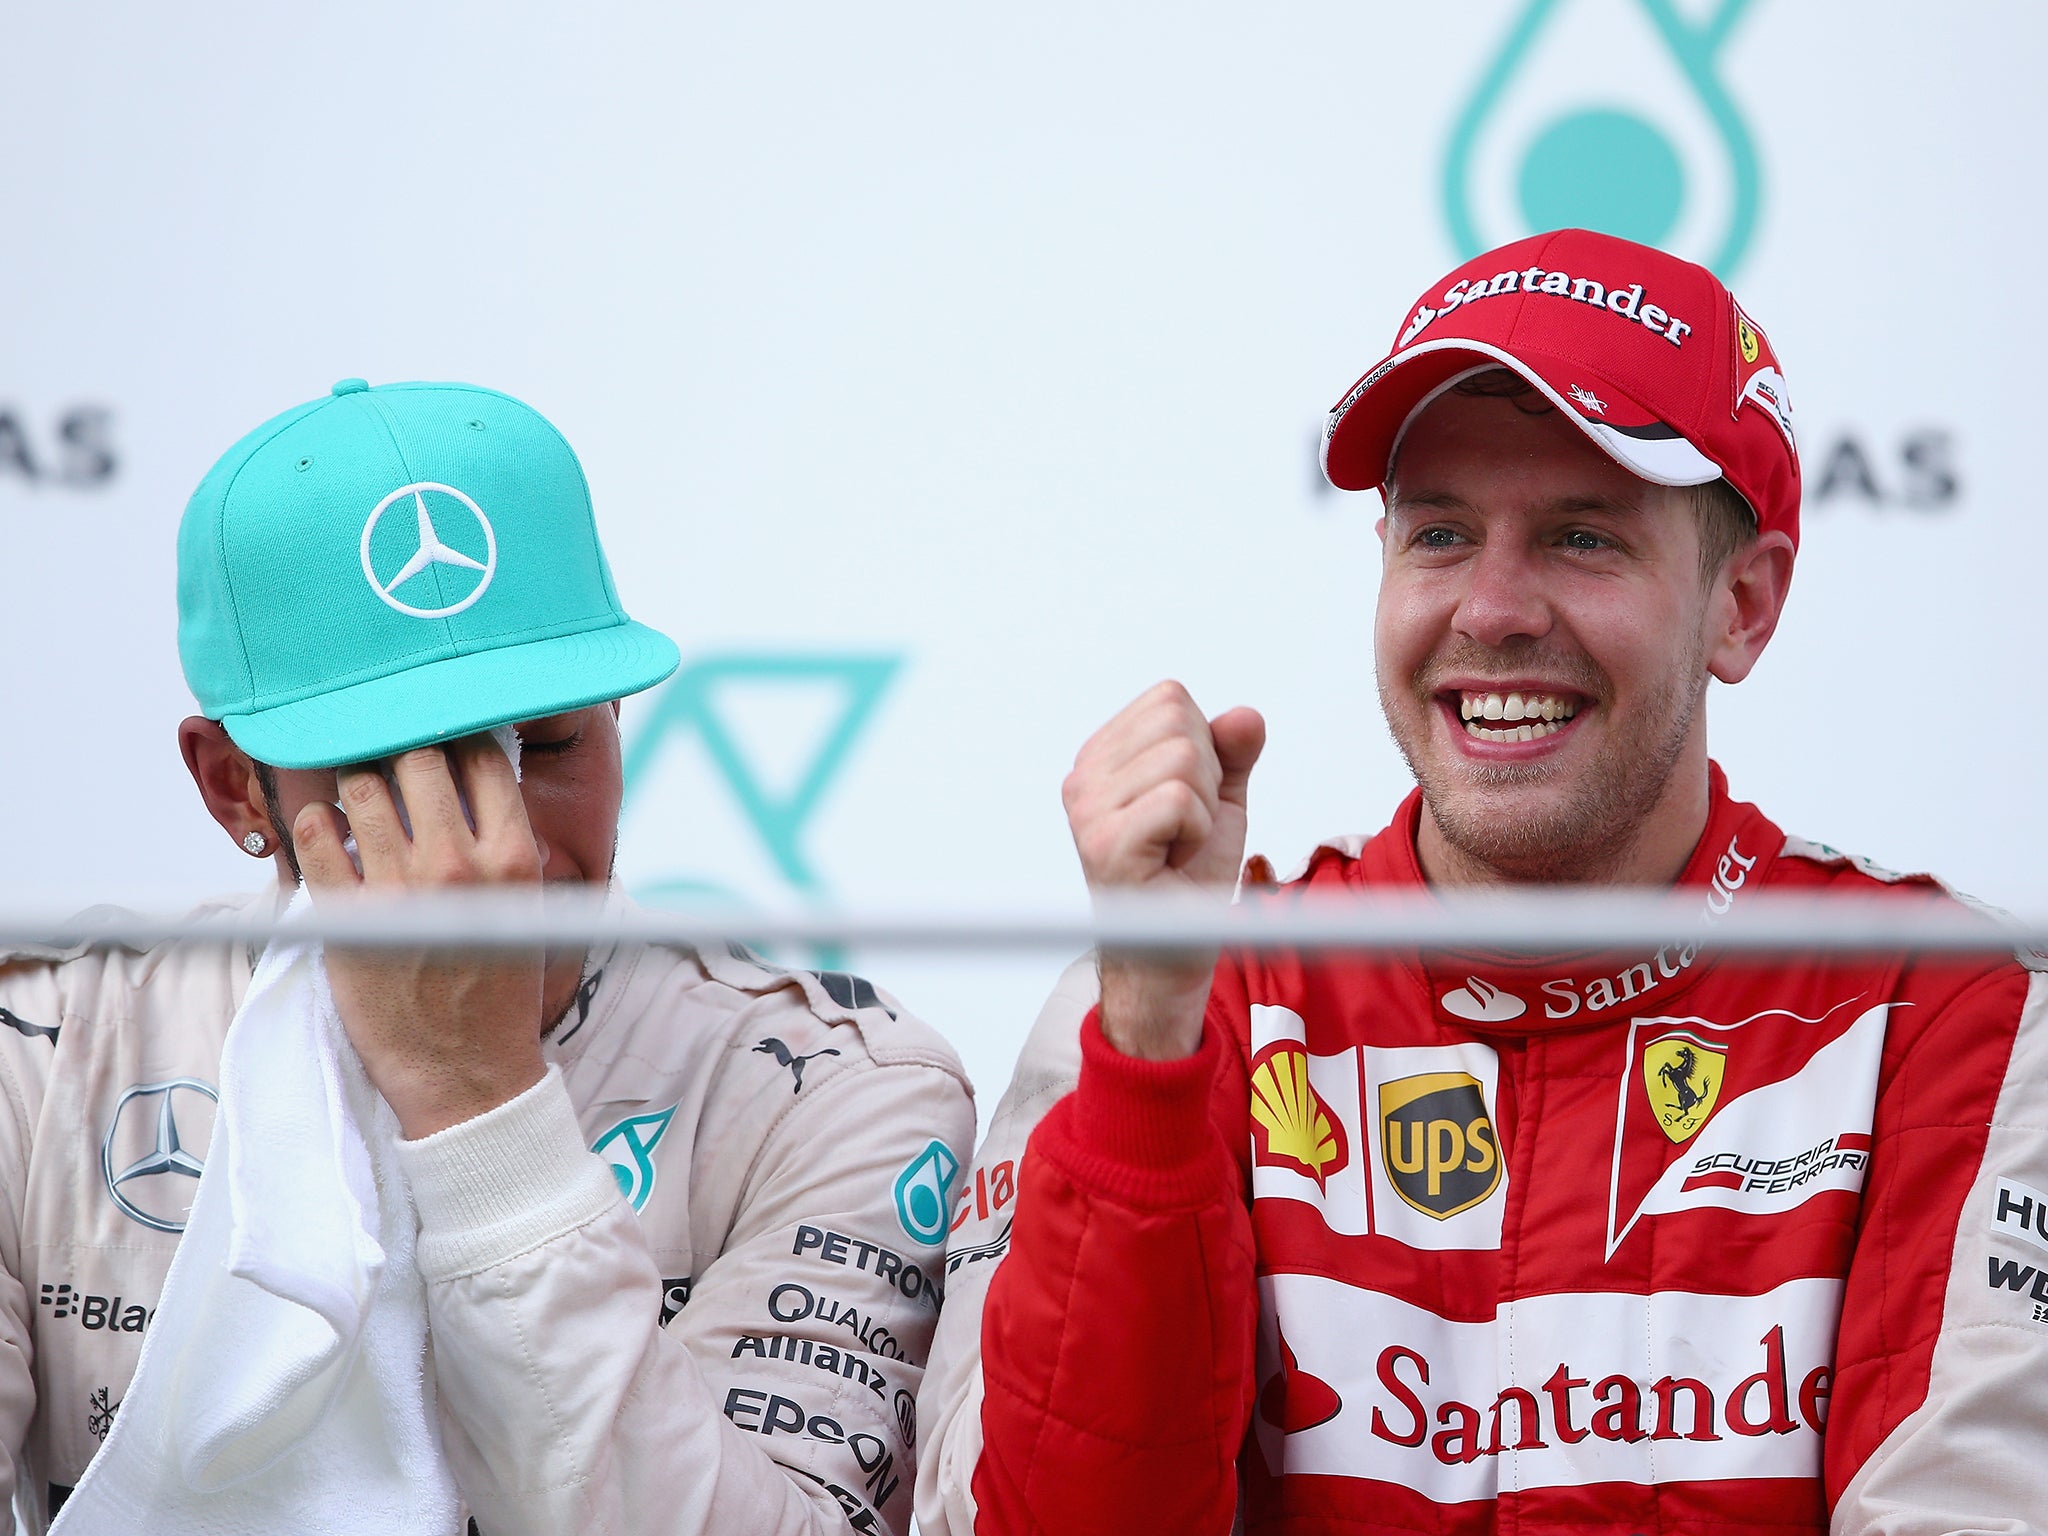 Sebastian Vettel of Germany and Ferrari celebrates on the podium next to Lewis Hamilton of Great Britain and Mercedes GP after winning the Malaysia Formula One Grand Prix at Sepang Circuit